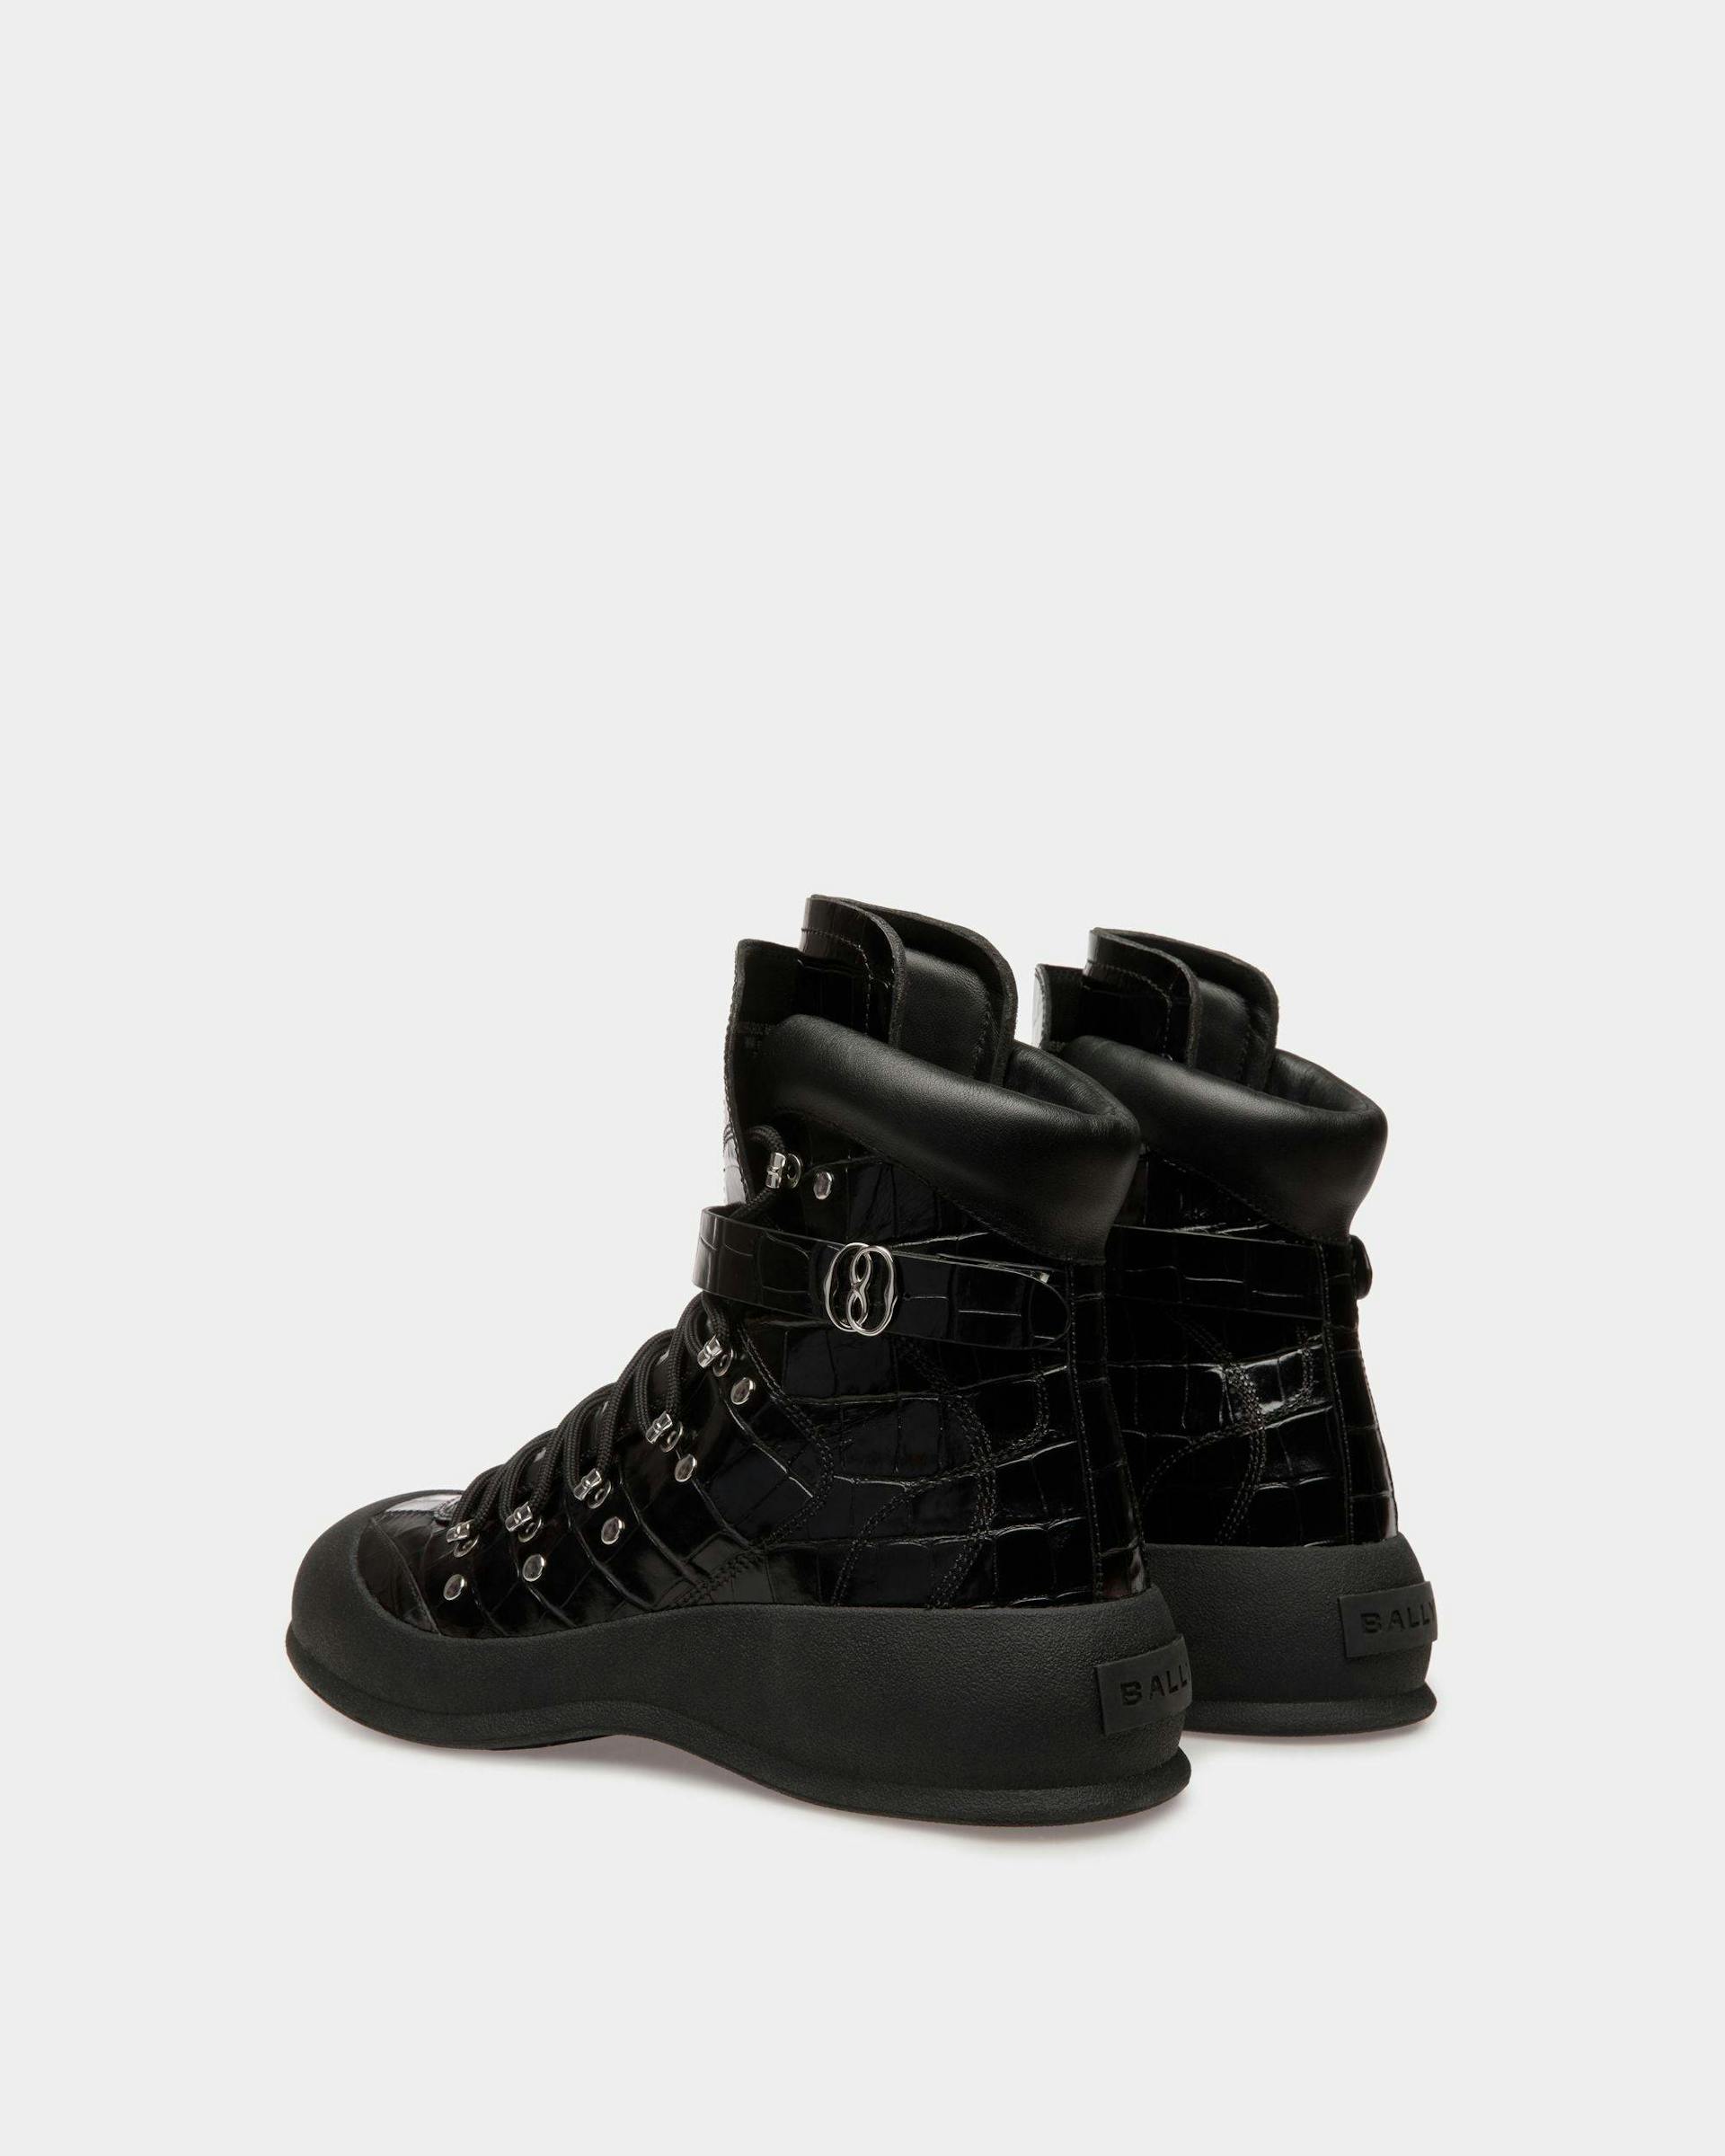 Frei Snow Boots In Black Leather - Men's - Bally - 04